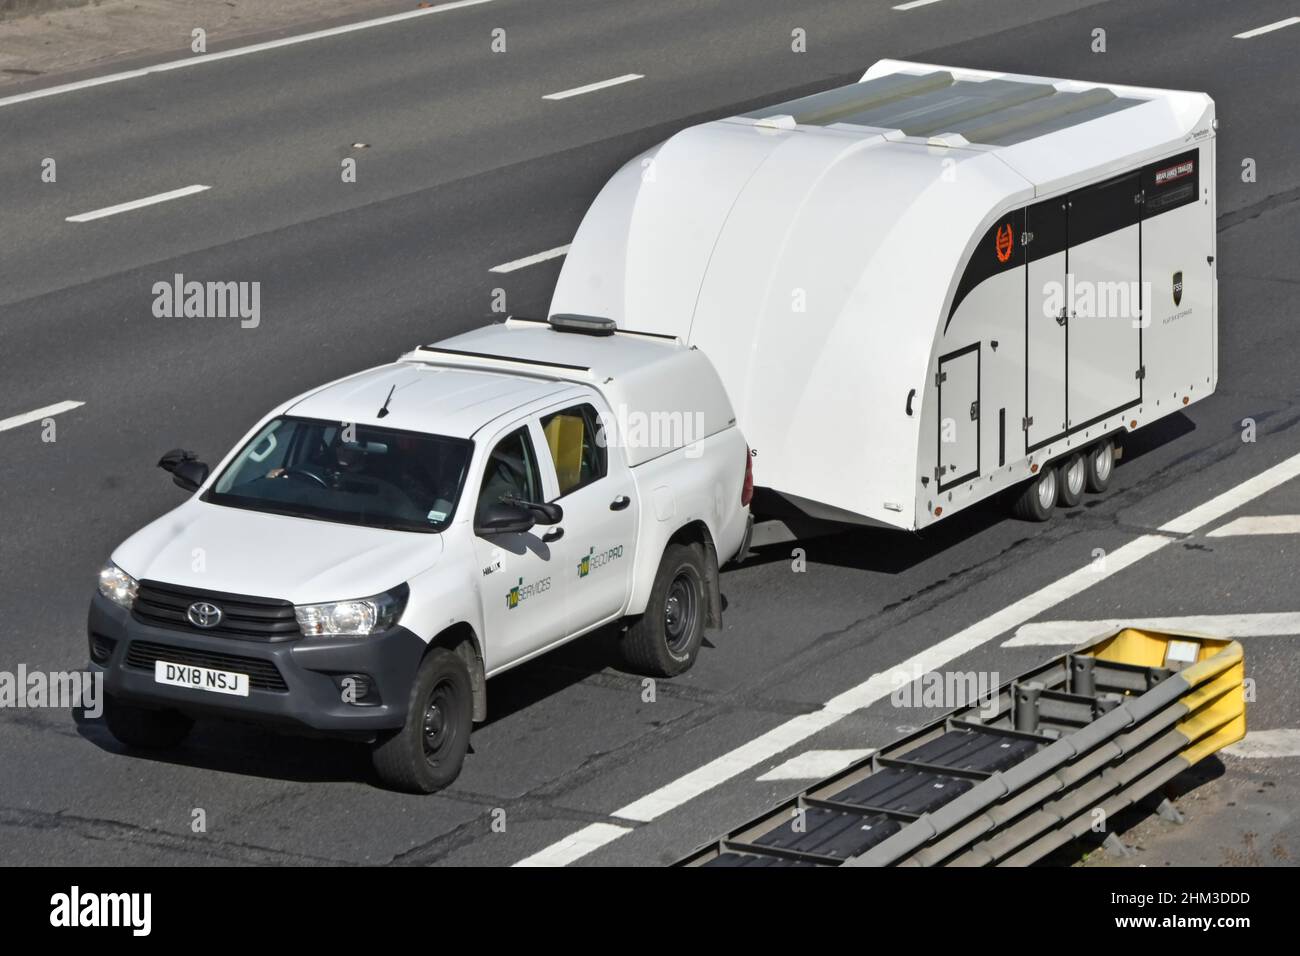 Vehicle delivery aerial side & front view Toyota Hilux pickup truck towing a white enclosed secure car transporter trailer driving on UK motorway road Stock Photo